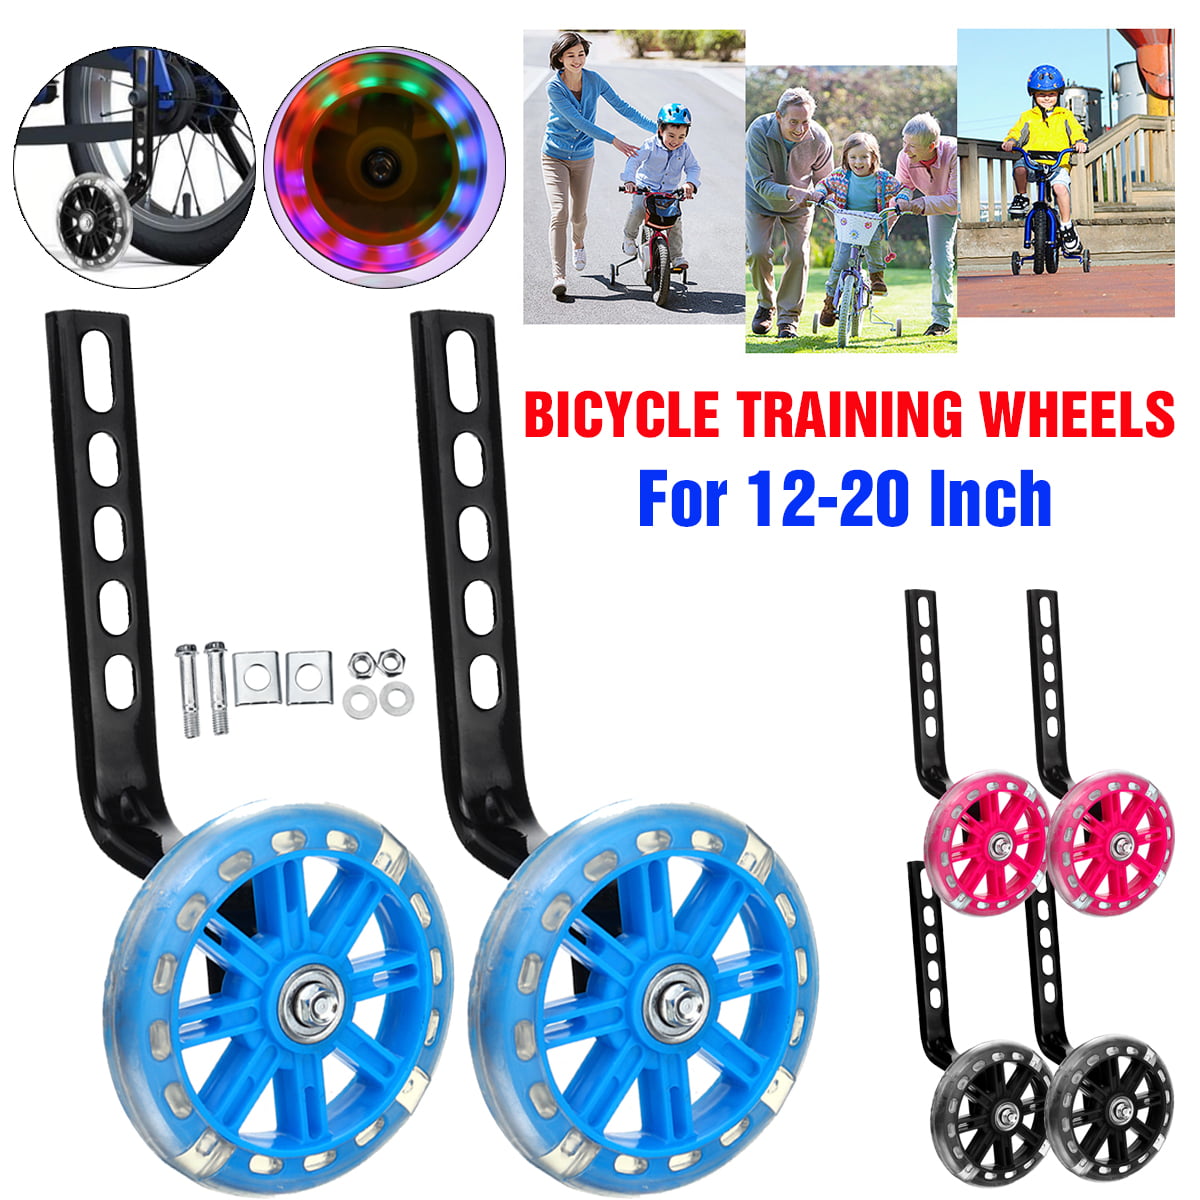 Bike Training Wheels,Durable Mute Bike Stabilizers with Light Mounted Kit Safe